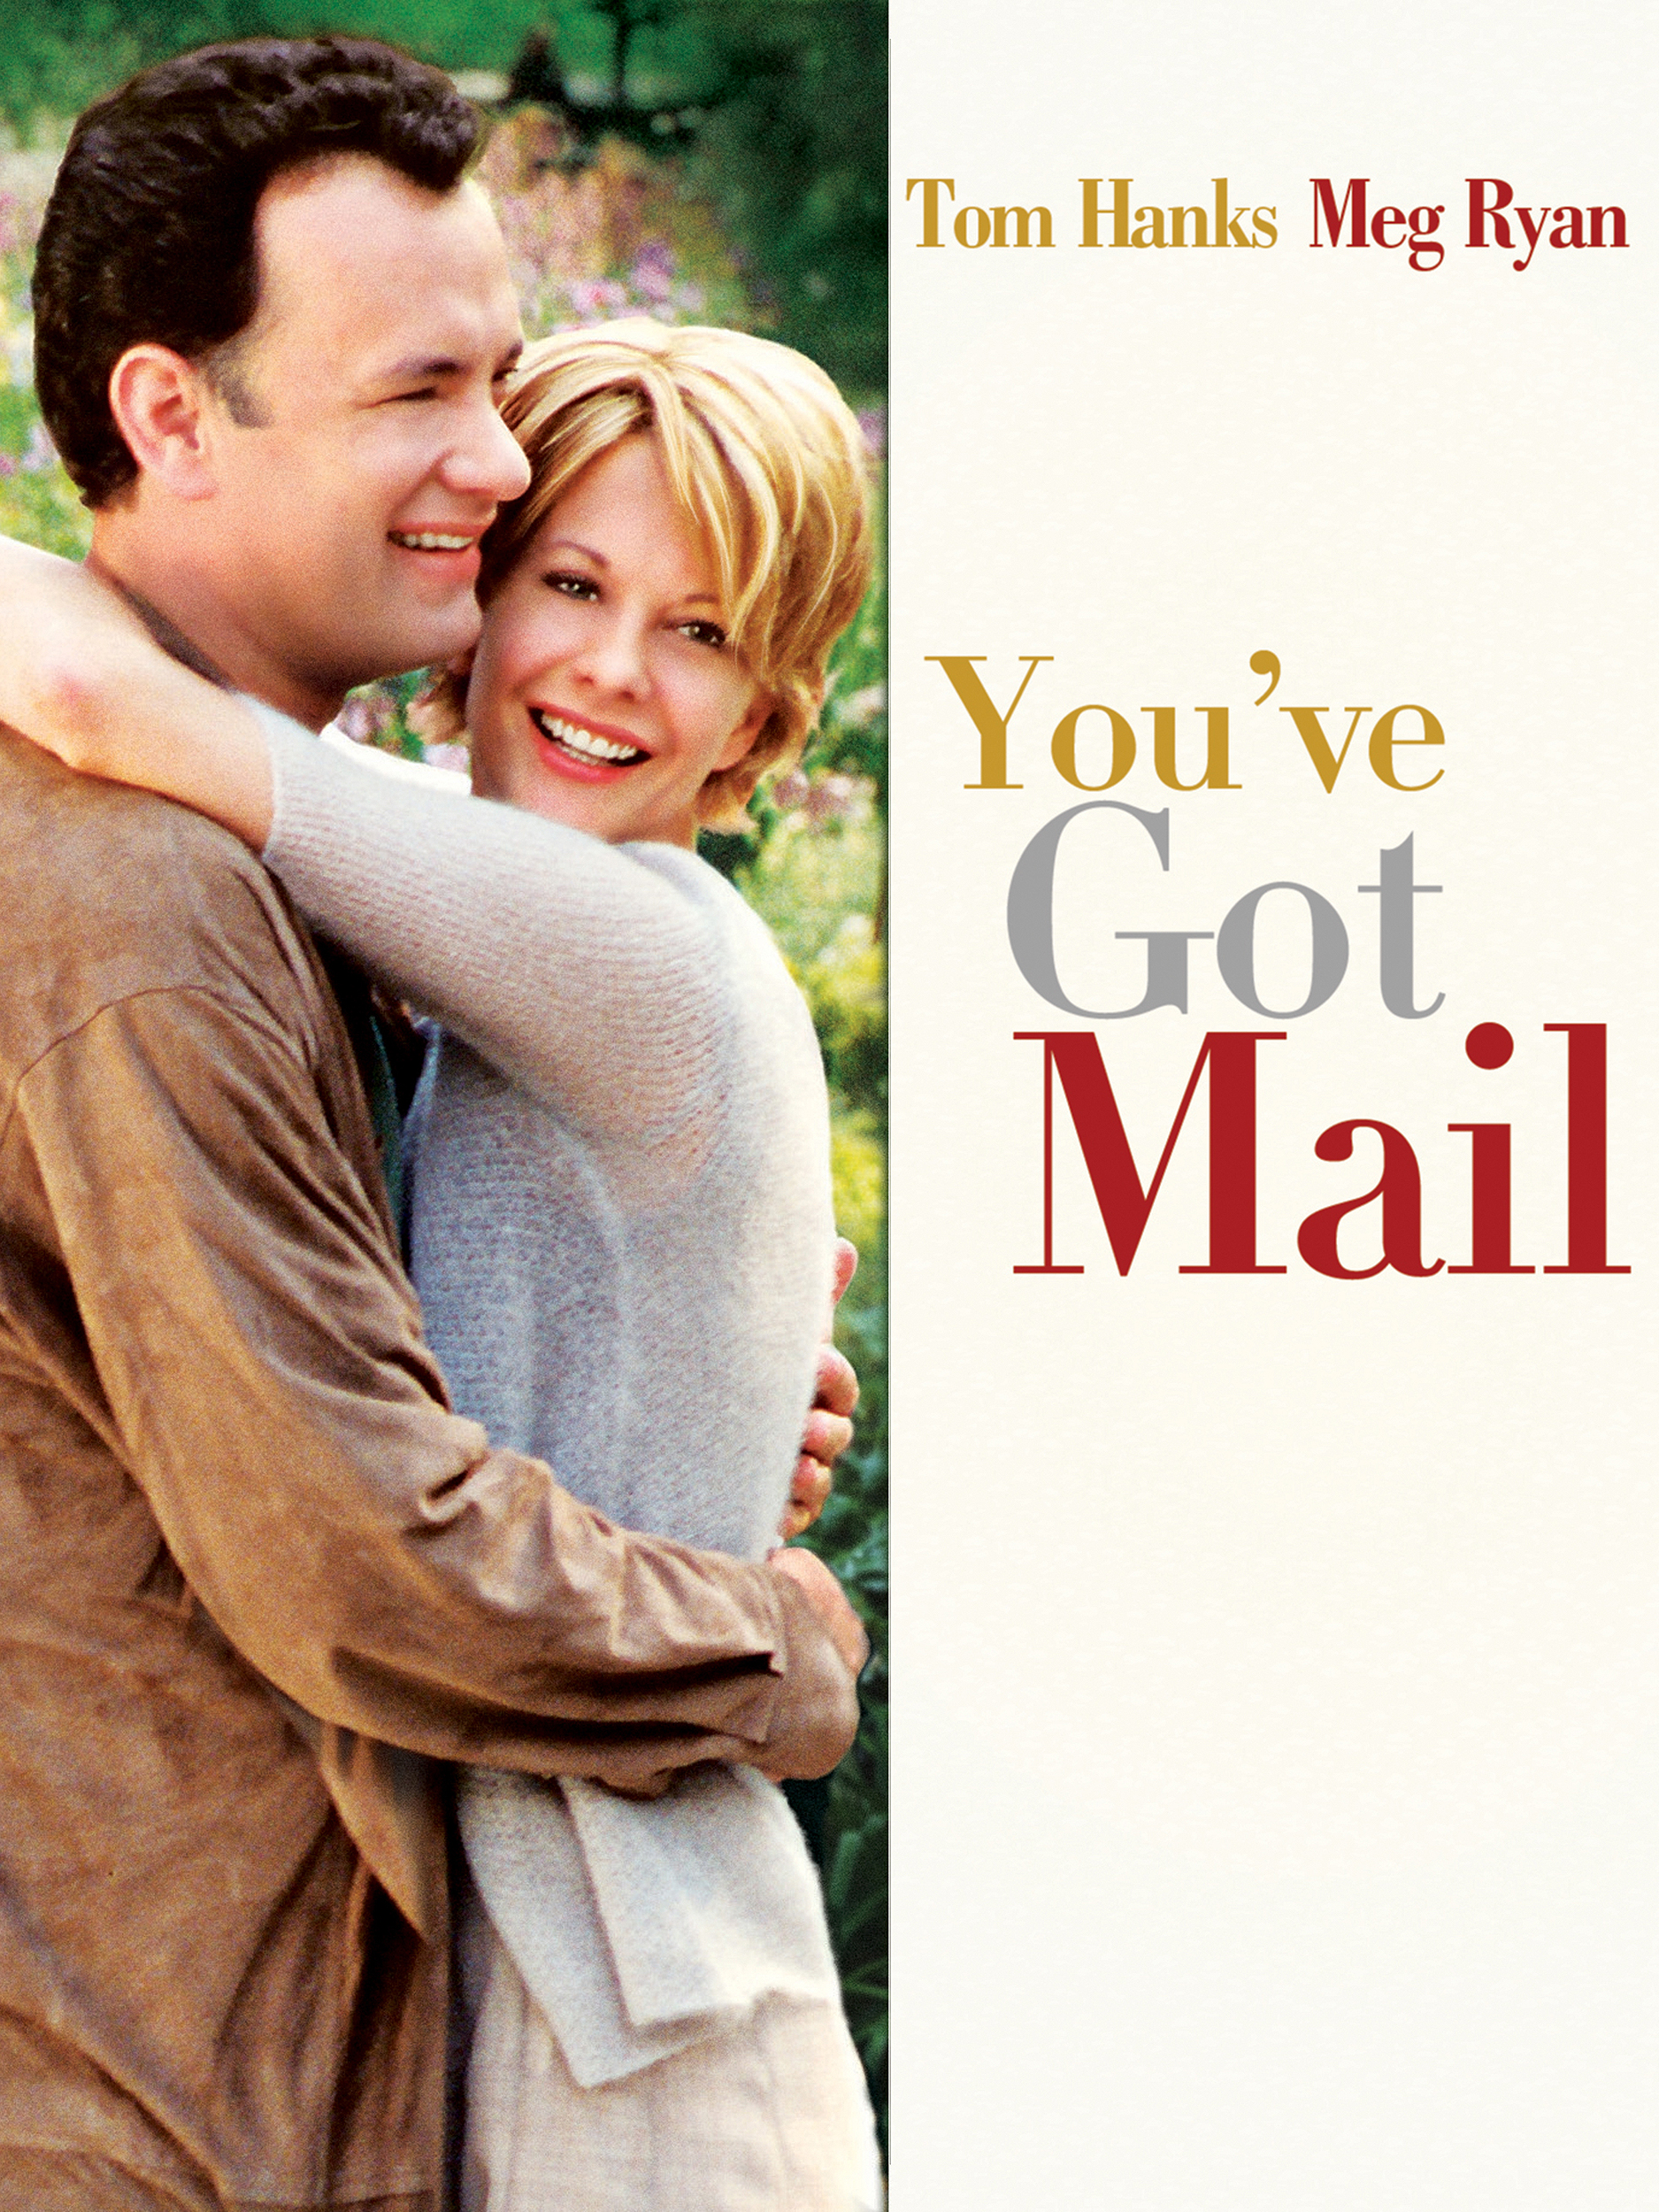 The website for the movie 'You've Got Mail' is a '90s web design